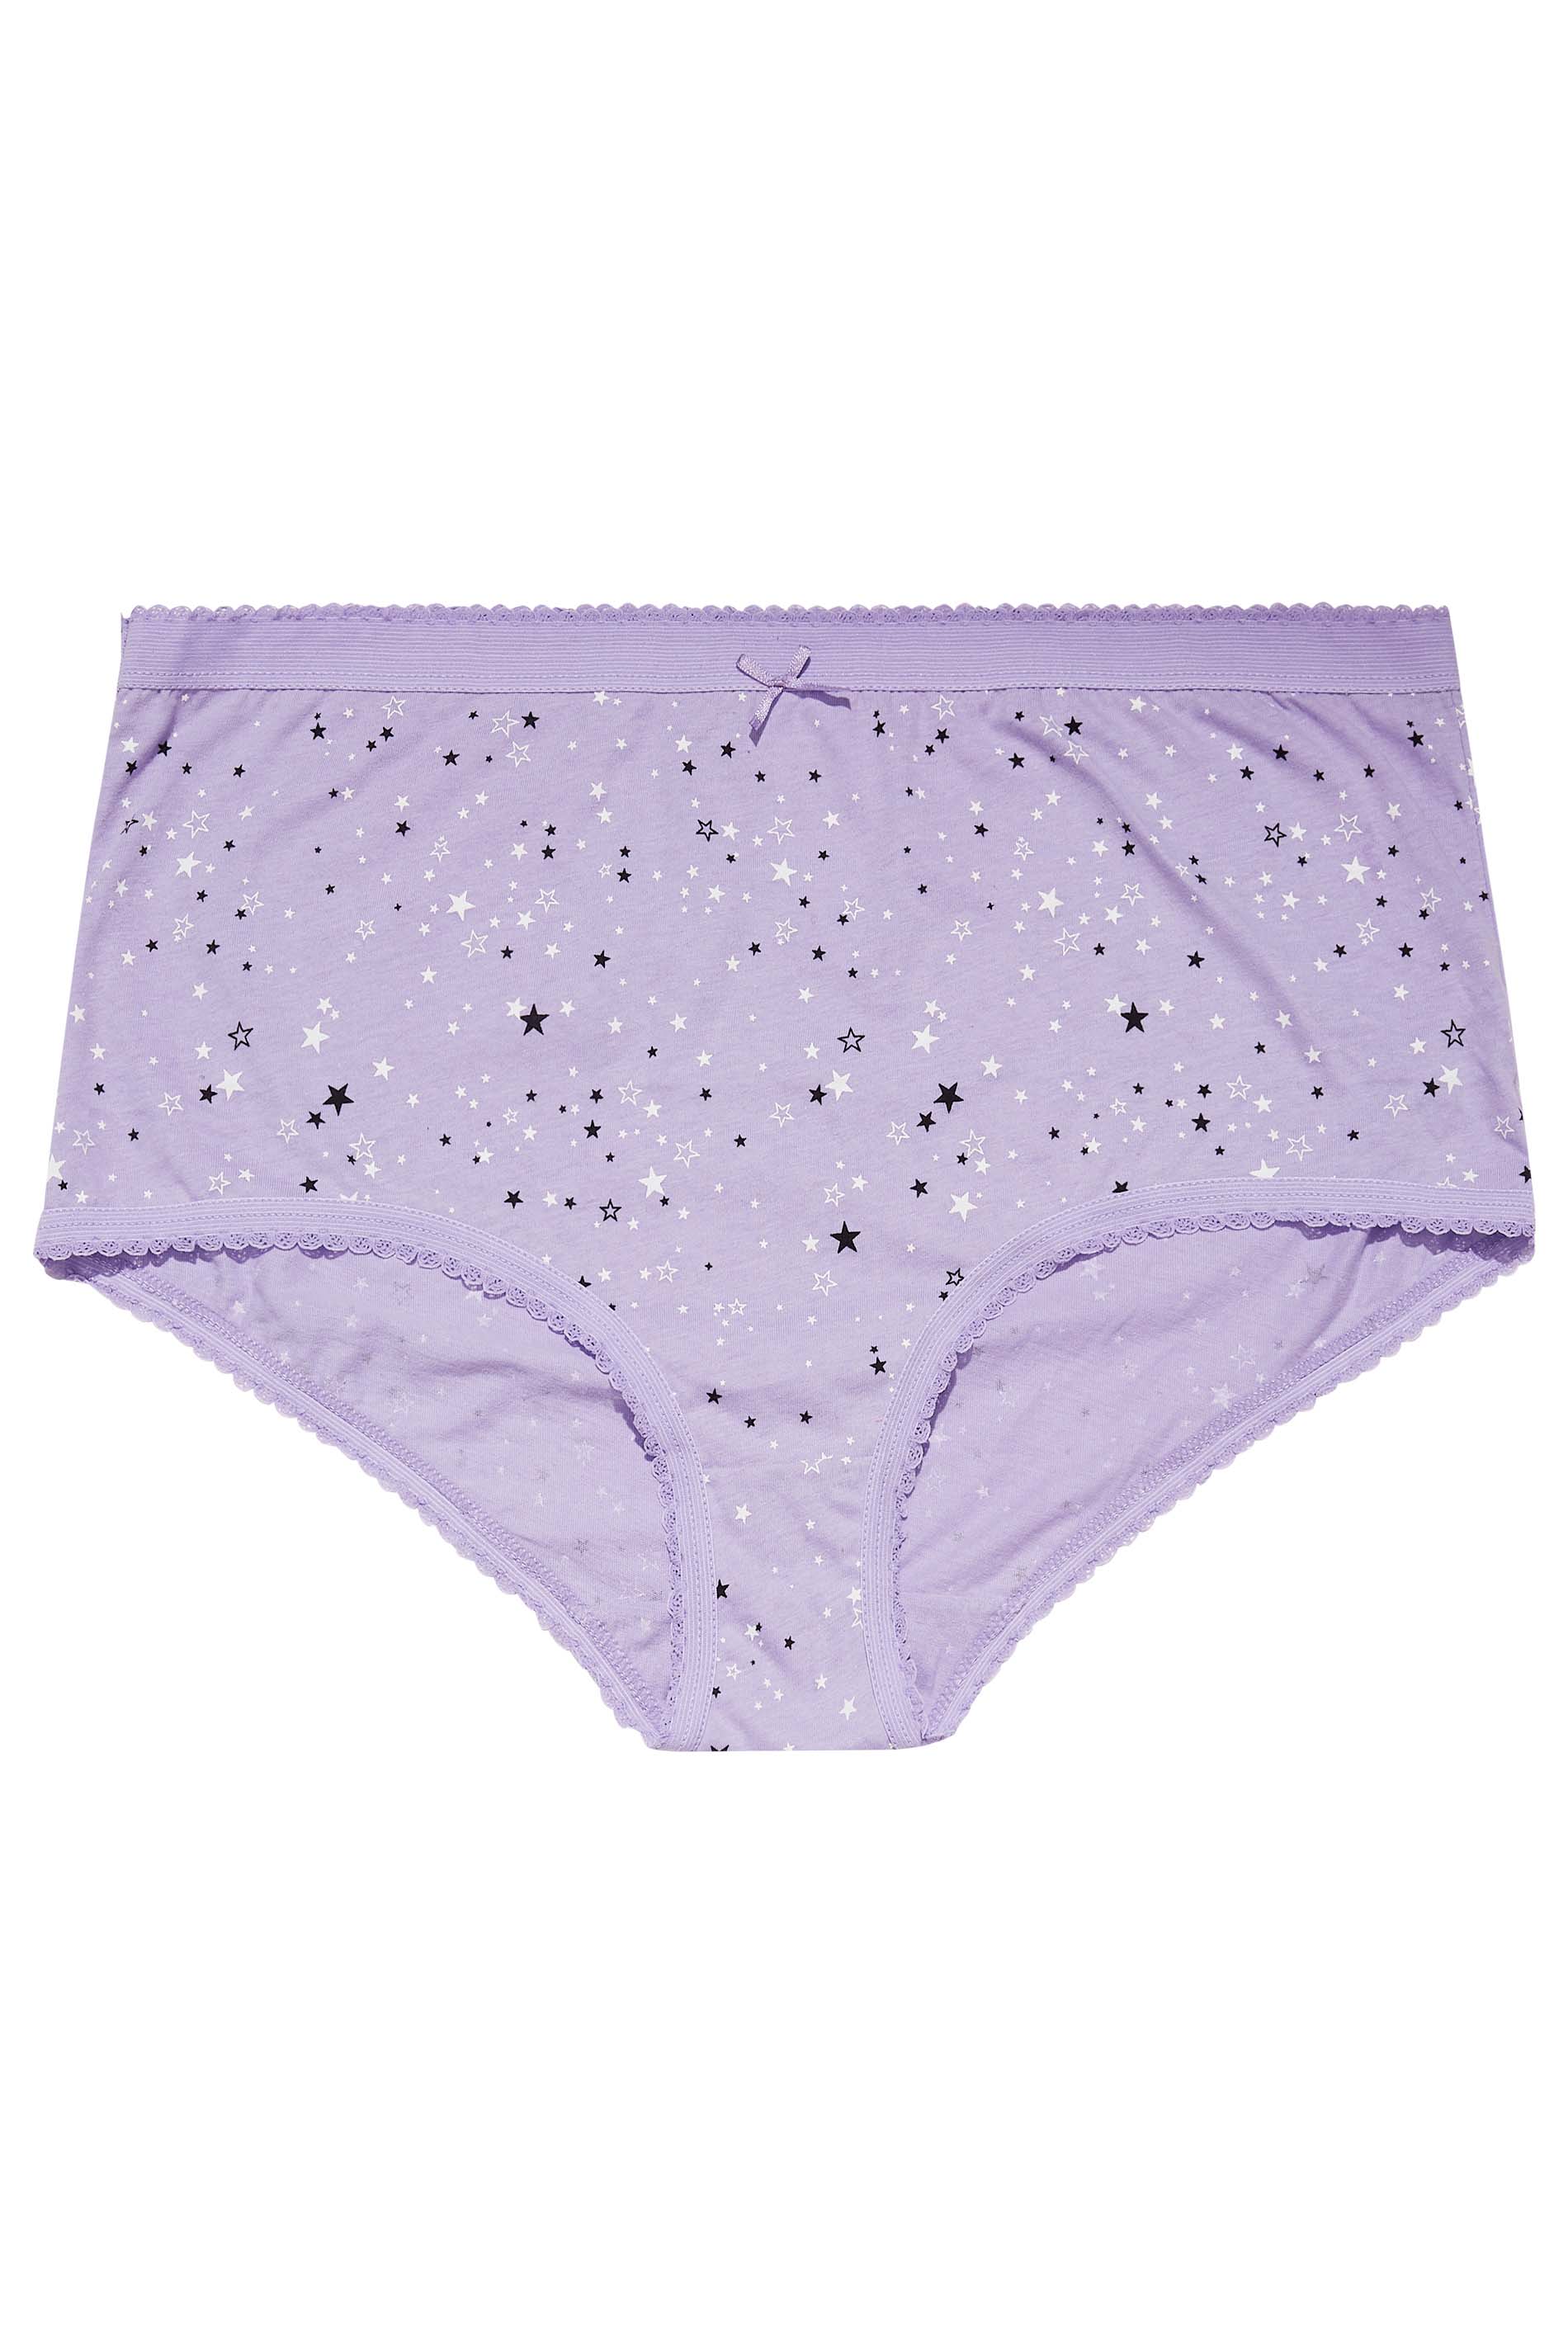 5 PACK Curve Black & Purple Star Print Briefs | Yours Clothing 3